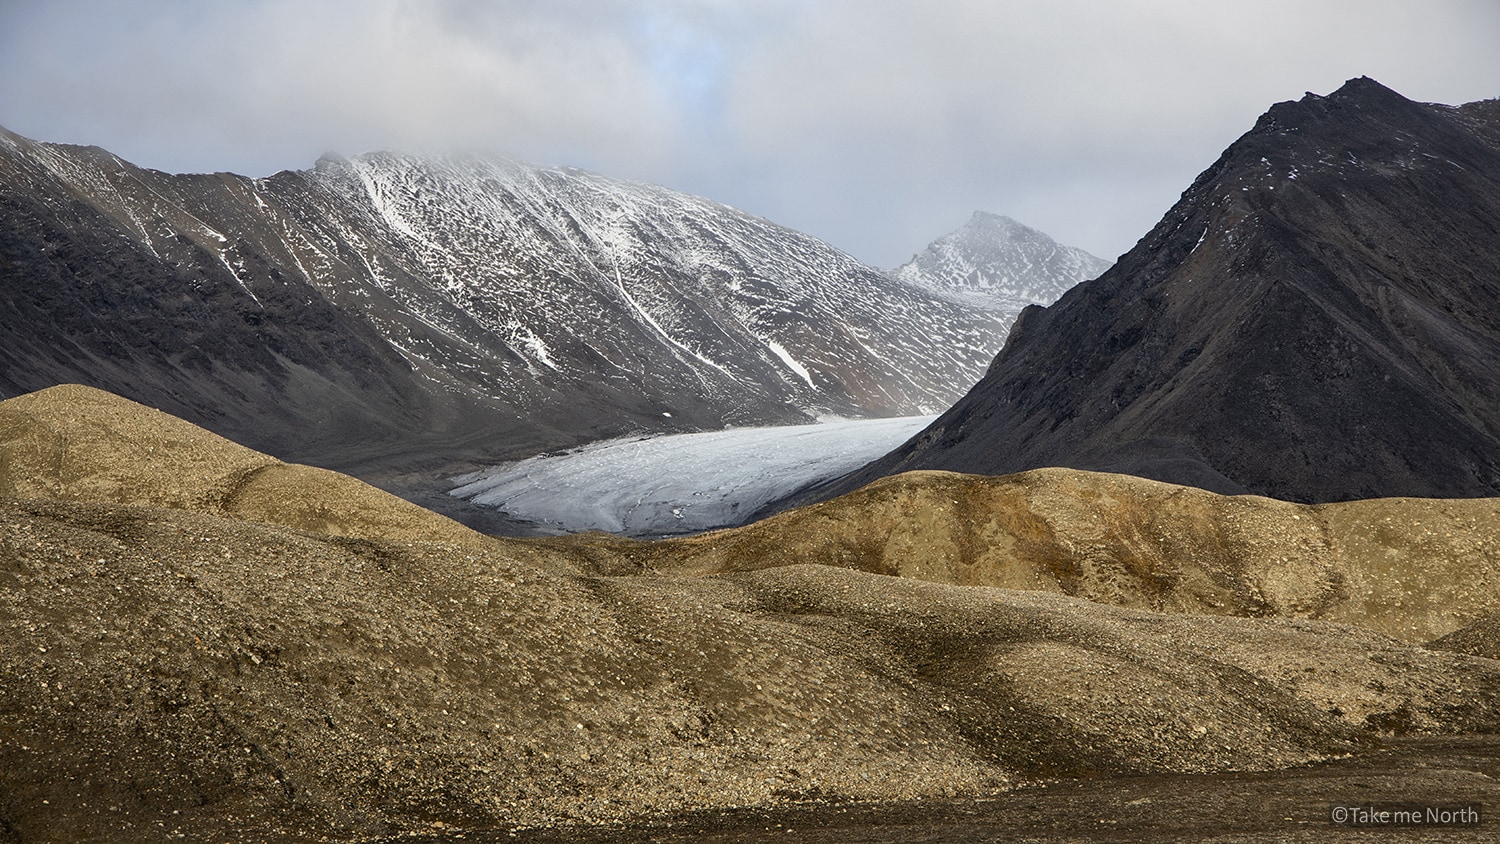 A view over the moraines of Uvêrsbreen